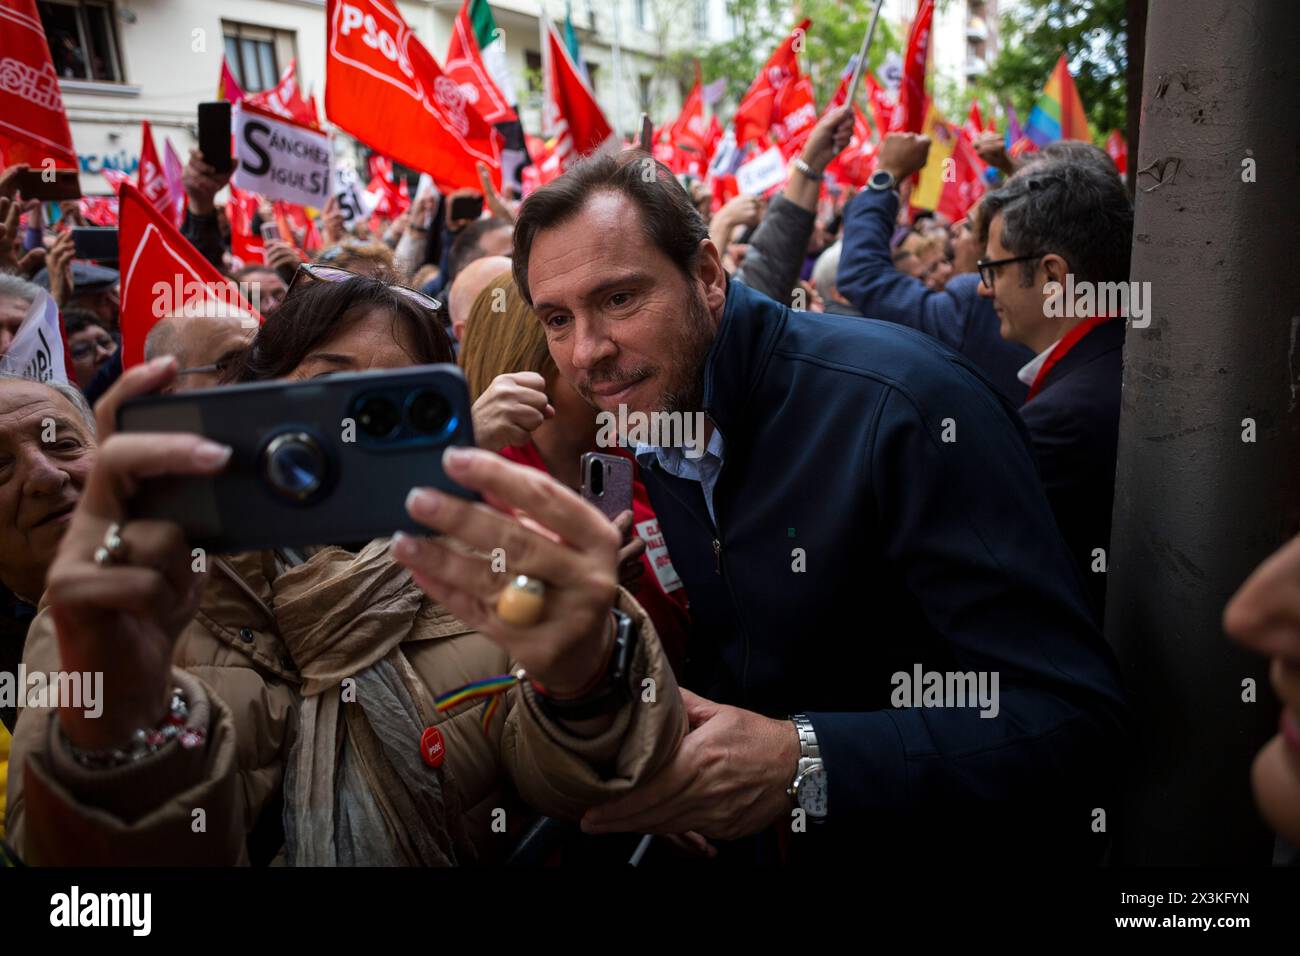 A protester takes a selfie with Oscar Puente, Minister of Transport and Sustainable Mobility of Spain, during a demonstration on Ferraz Street in Madrid, in support of Pedro Sanchez to continue in the position of president of the government. Pedro Sanchez, canceled his public agenda for four days and reflects on his continuity as head of the Executive. The Federal Committee of the Spanish Socialist Workers Party (PSOE) held a meeting and demonstrated at the national headquarters on Ferraz Street in Madrid to show support for the party's general secretary and president of the Government of Spai Stock Photo